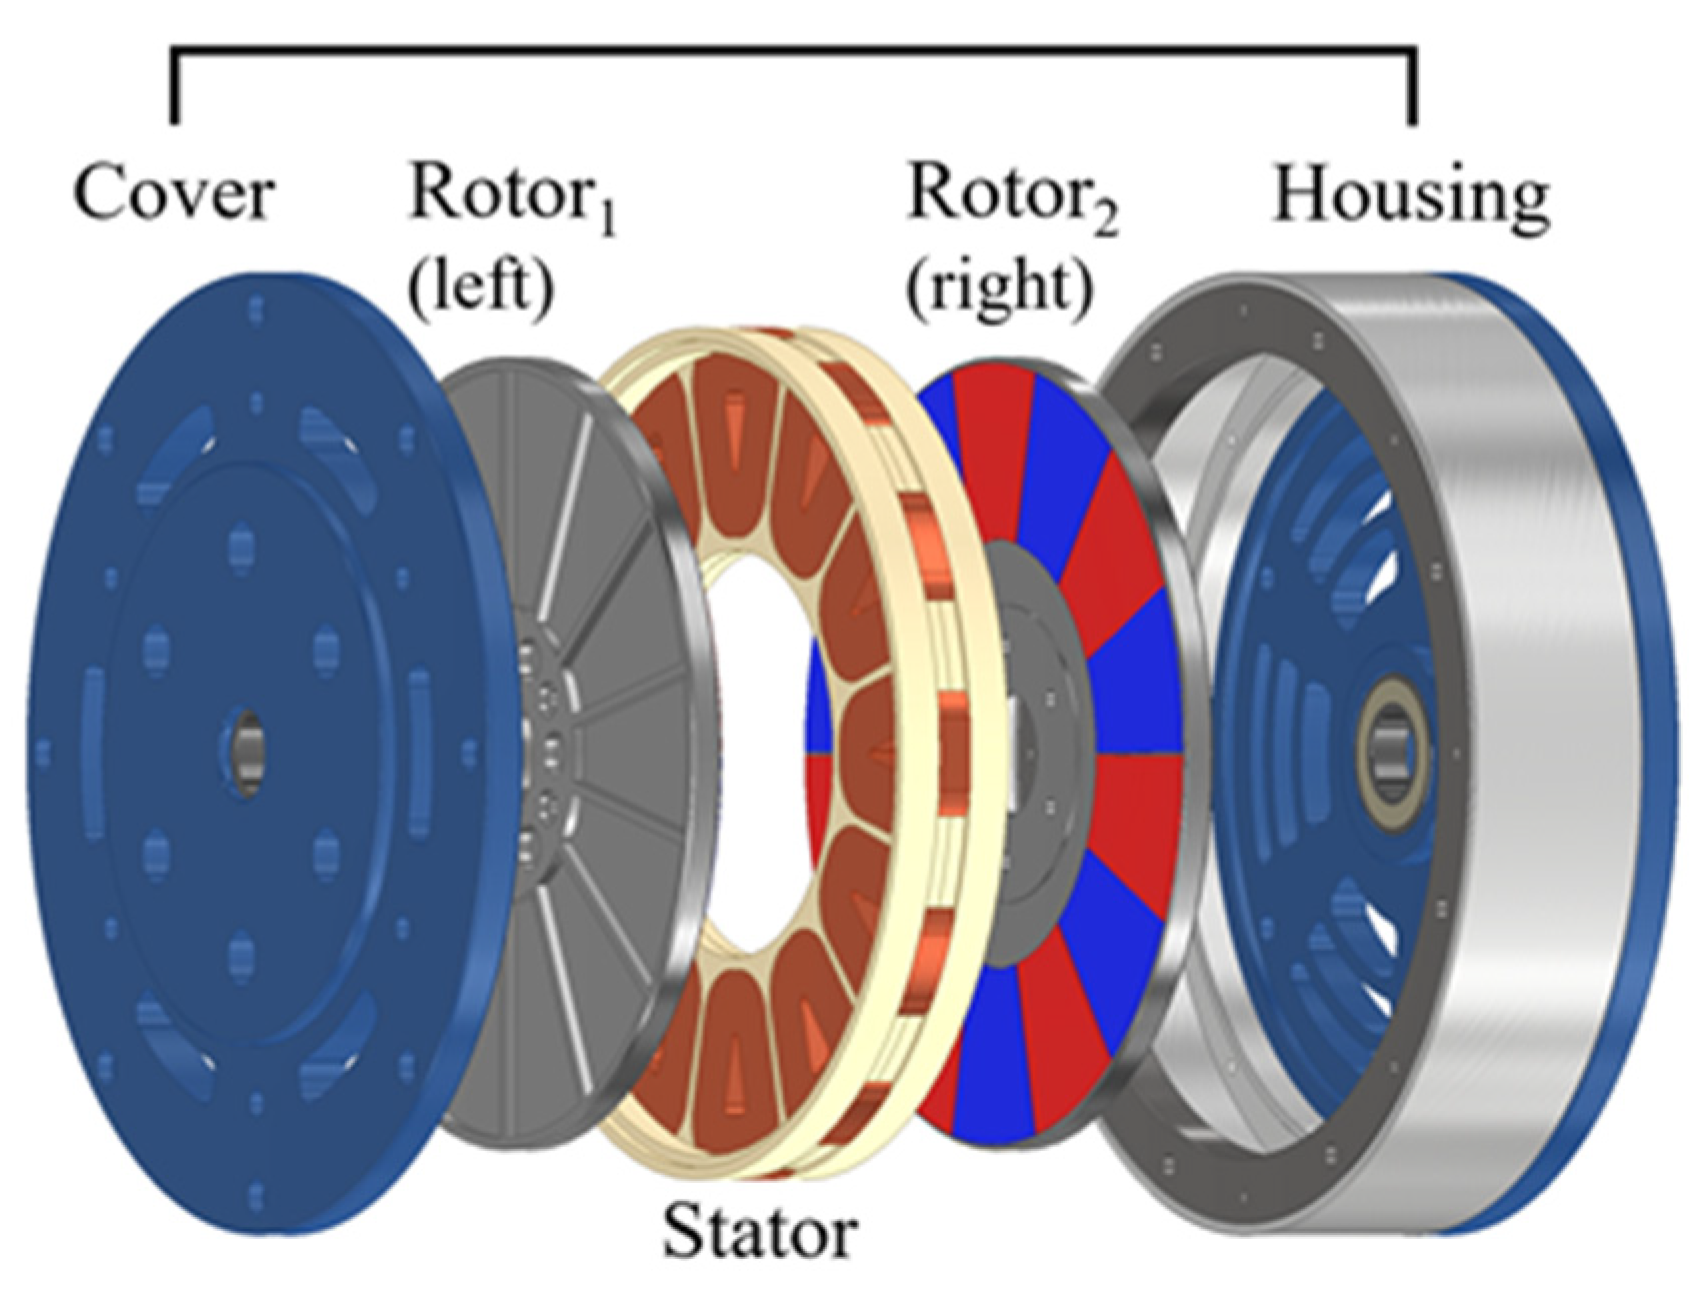 Energies | Free Full-Text | Axial-Flux Permanent-Magnet Design for Electric Propulsion Drone Applications